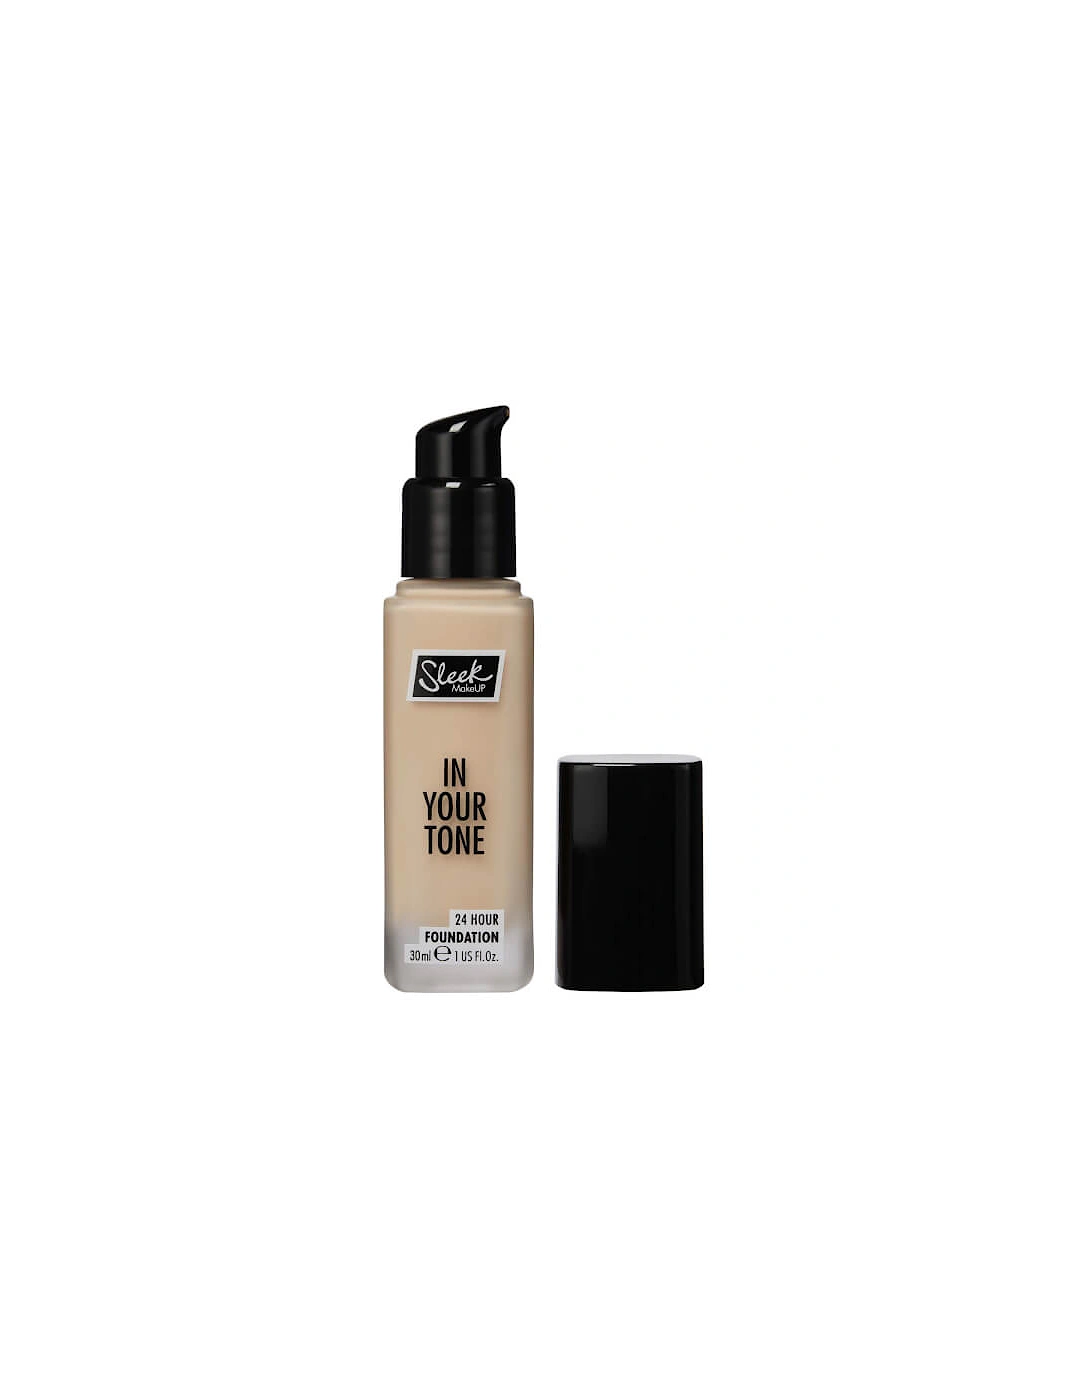 in Your Tone 24 Hour Foundation - 2W, 2 of 1